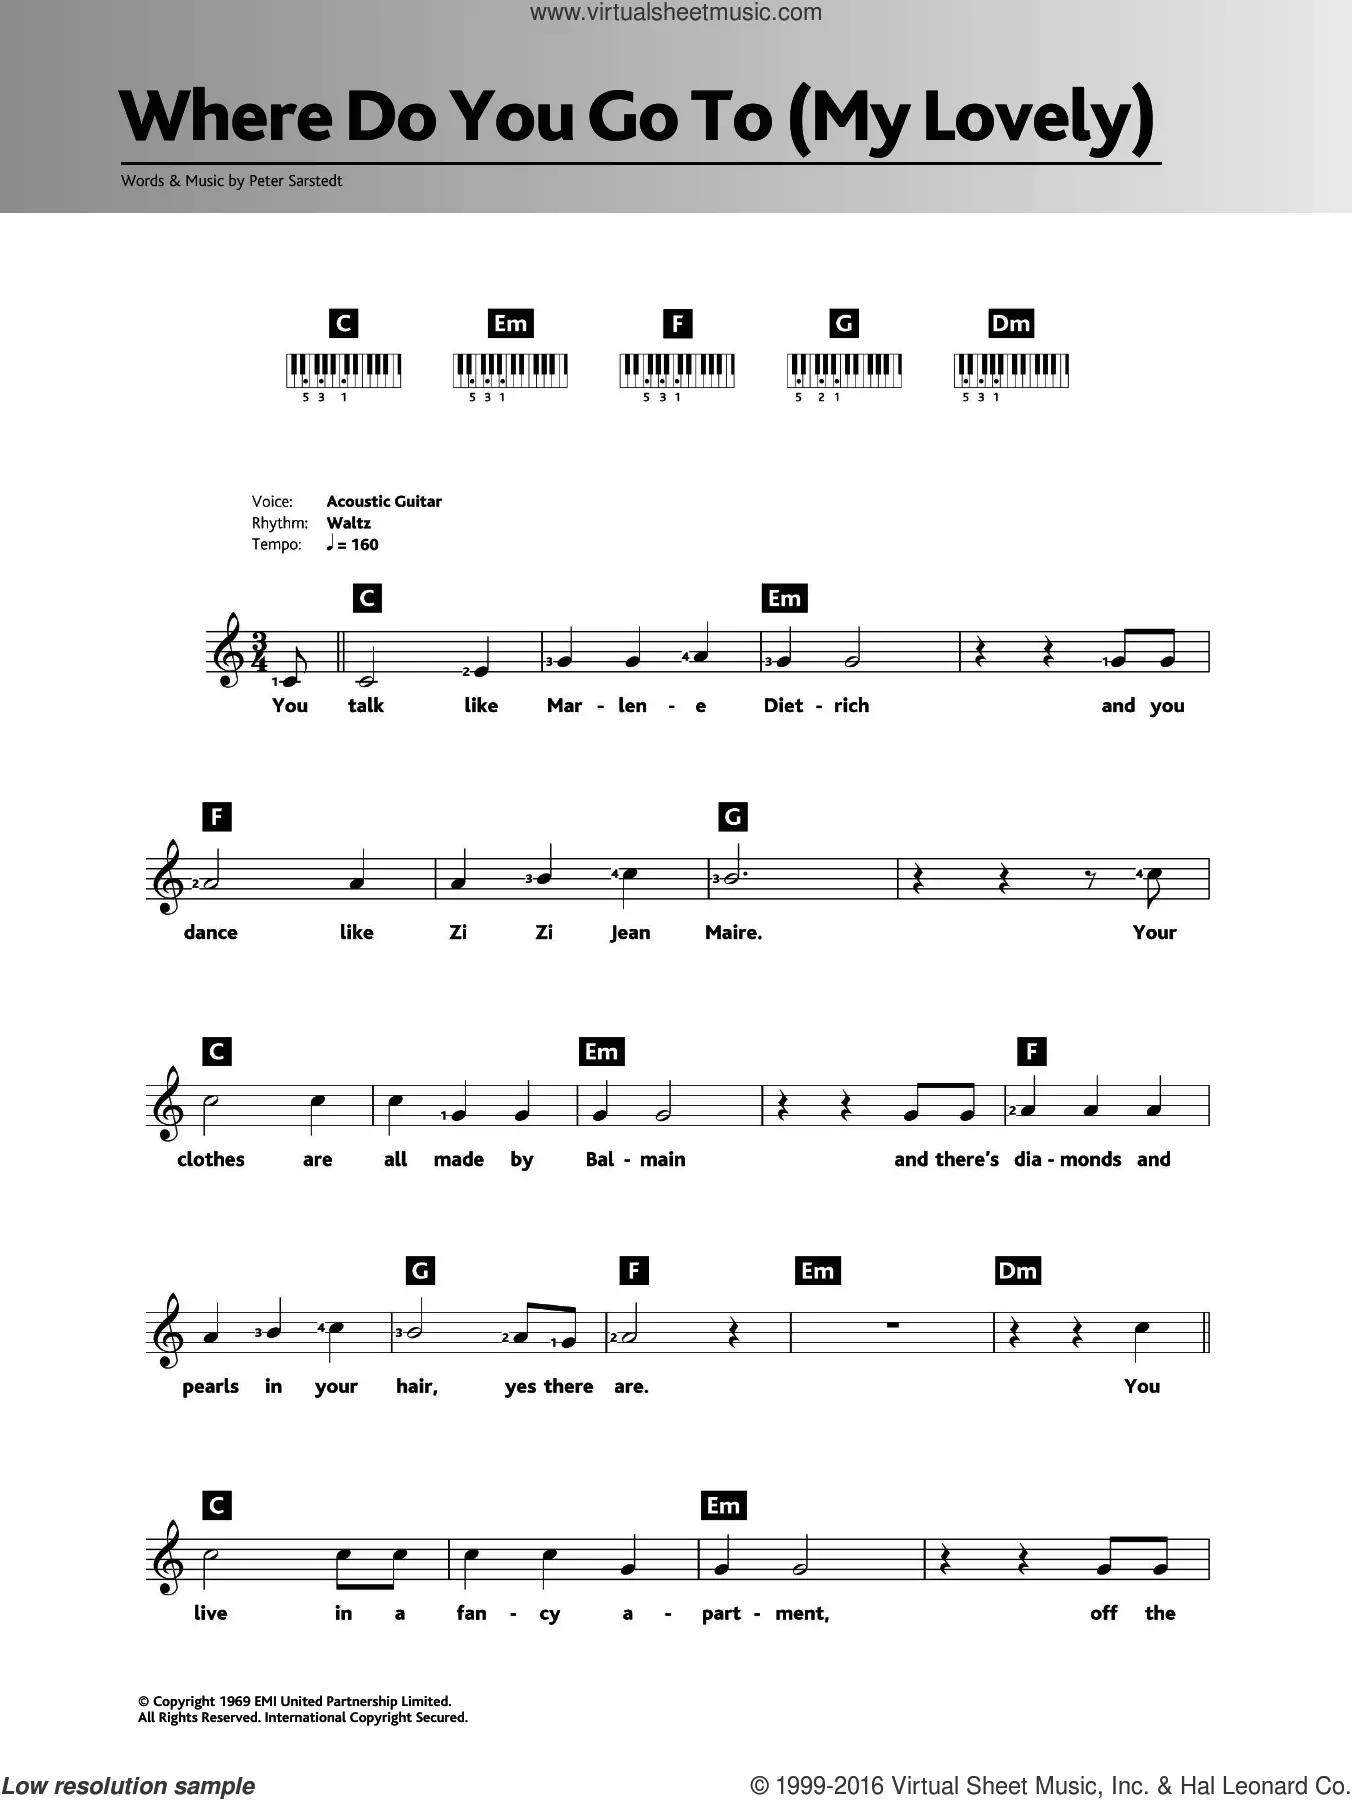 Peter Sarstedt - Where Do You Go To My Lovely [W]  Guitar chords for  songs, Music theory guitar, Lyrics and chords